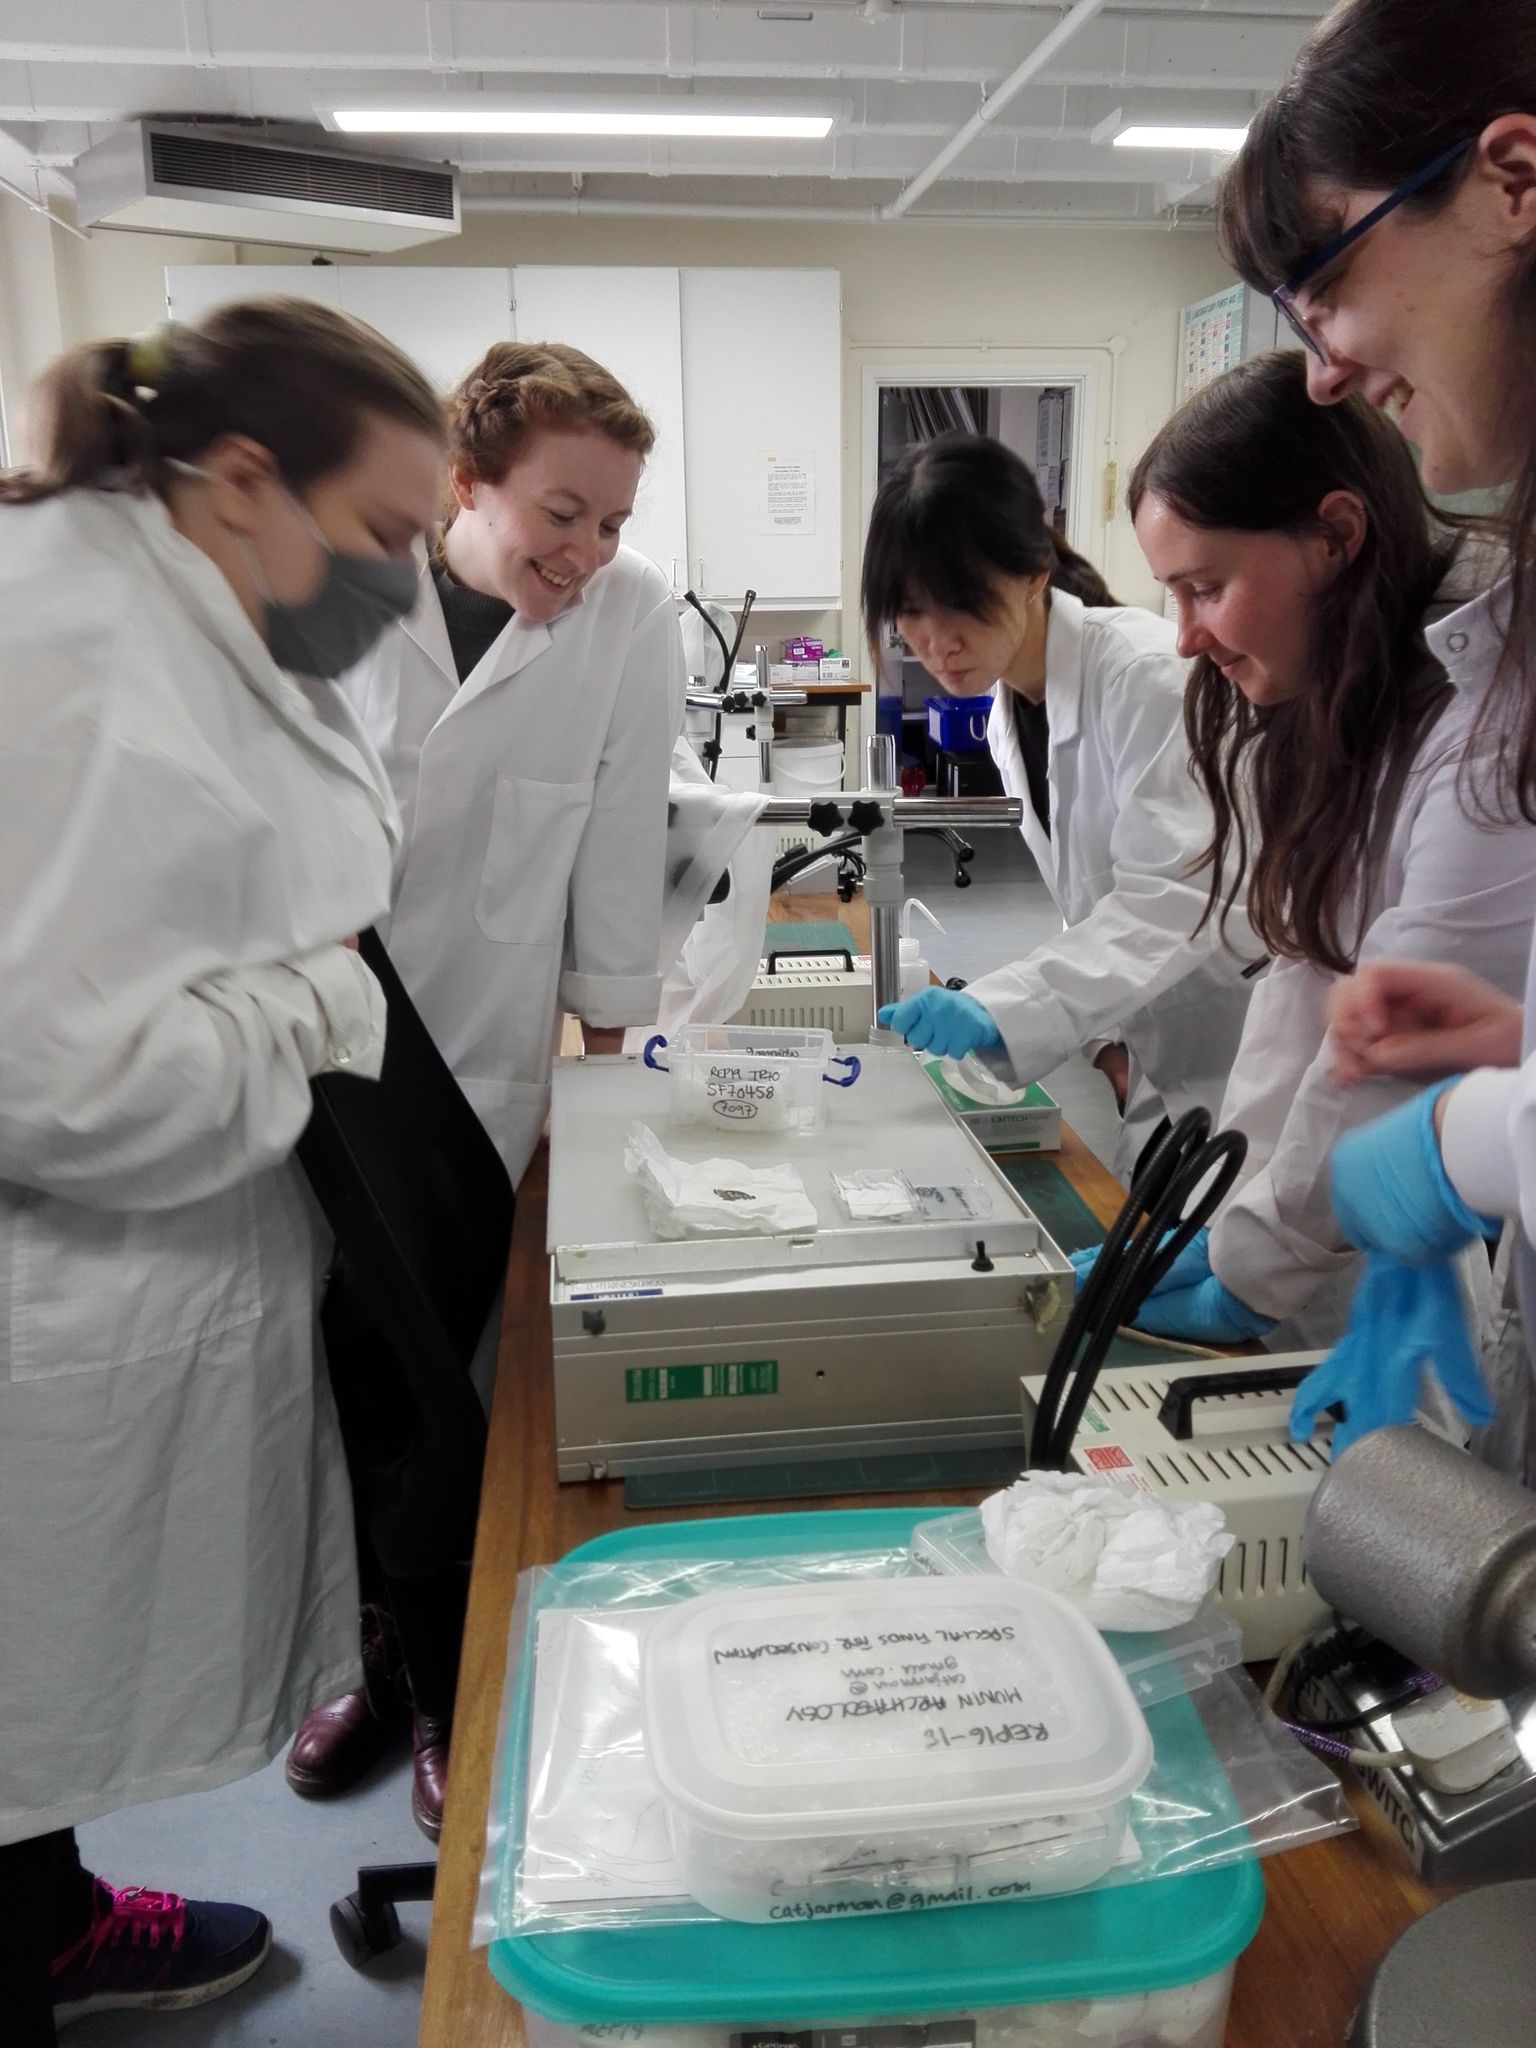 Five students in white lab coats gathered around a small open plastic box on a table, peering into it with smiles on their faces.